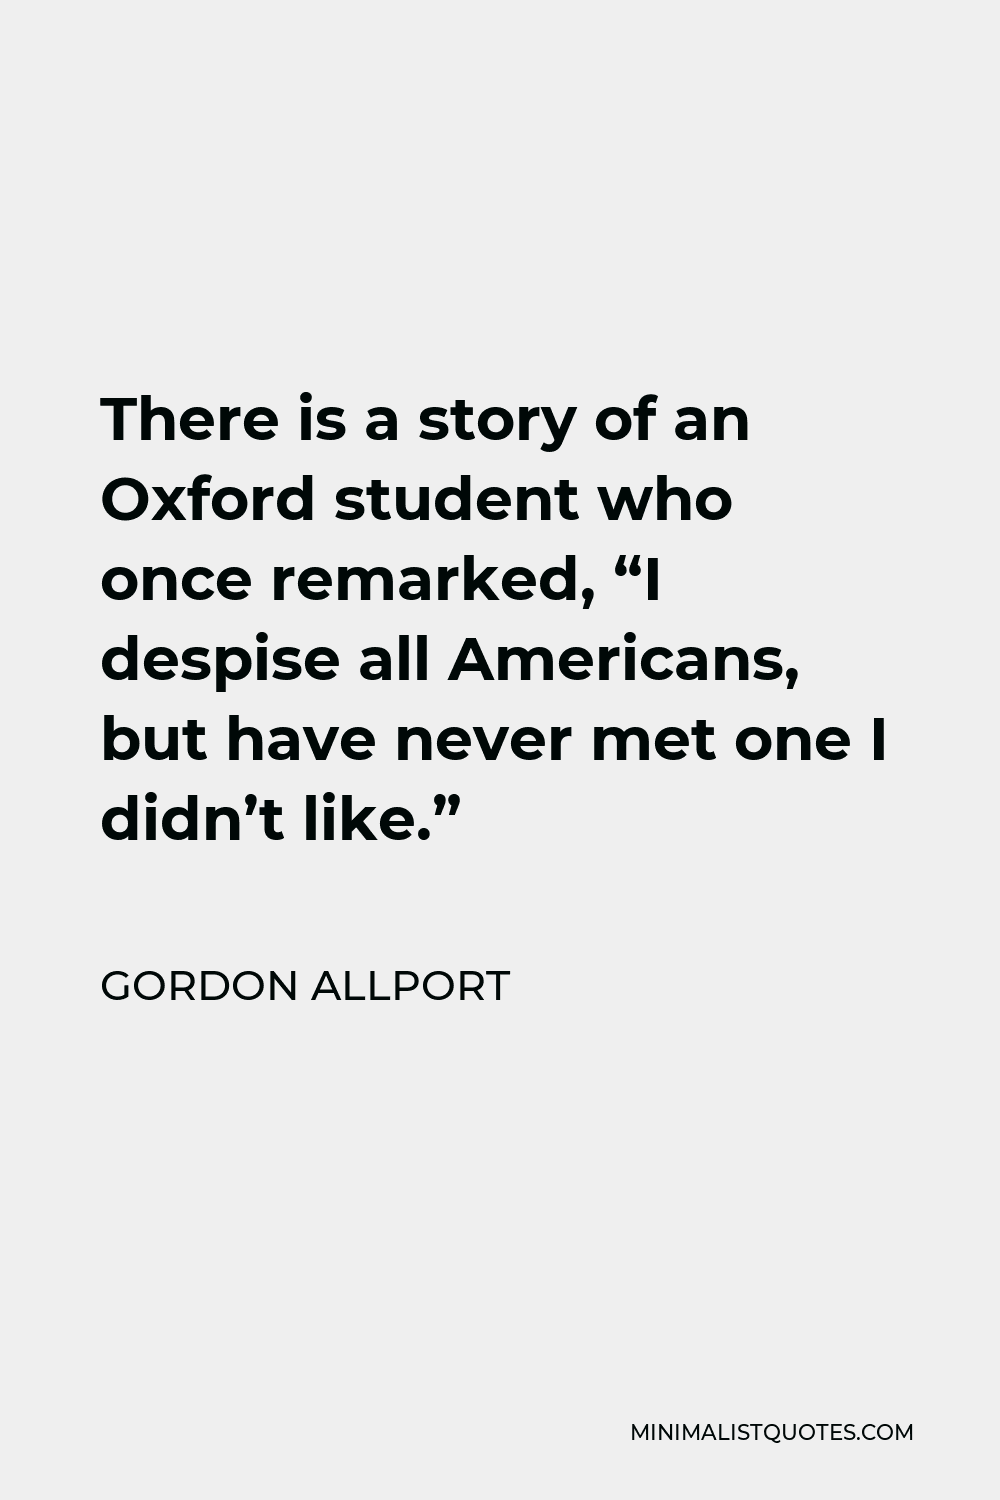 Gordon Allport Quote - There is a story of an Oxford student who once remarked, “I despise all Americans, but have never met one I didn’t like.”